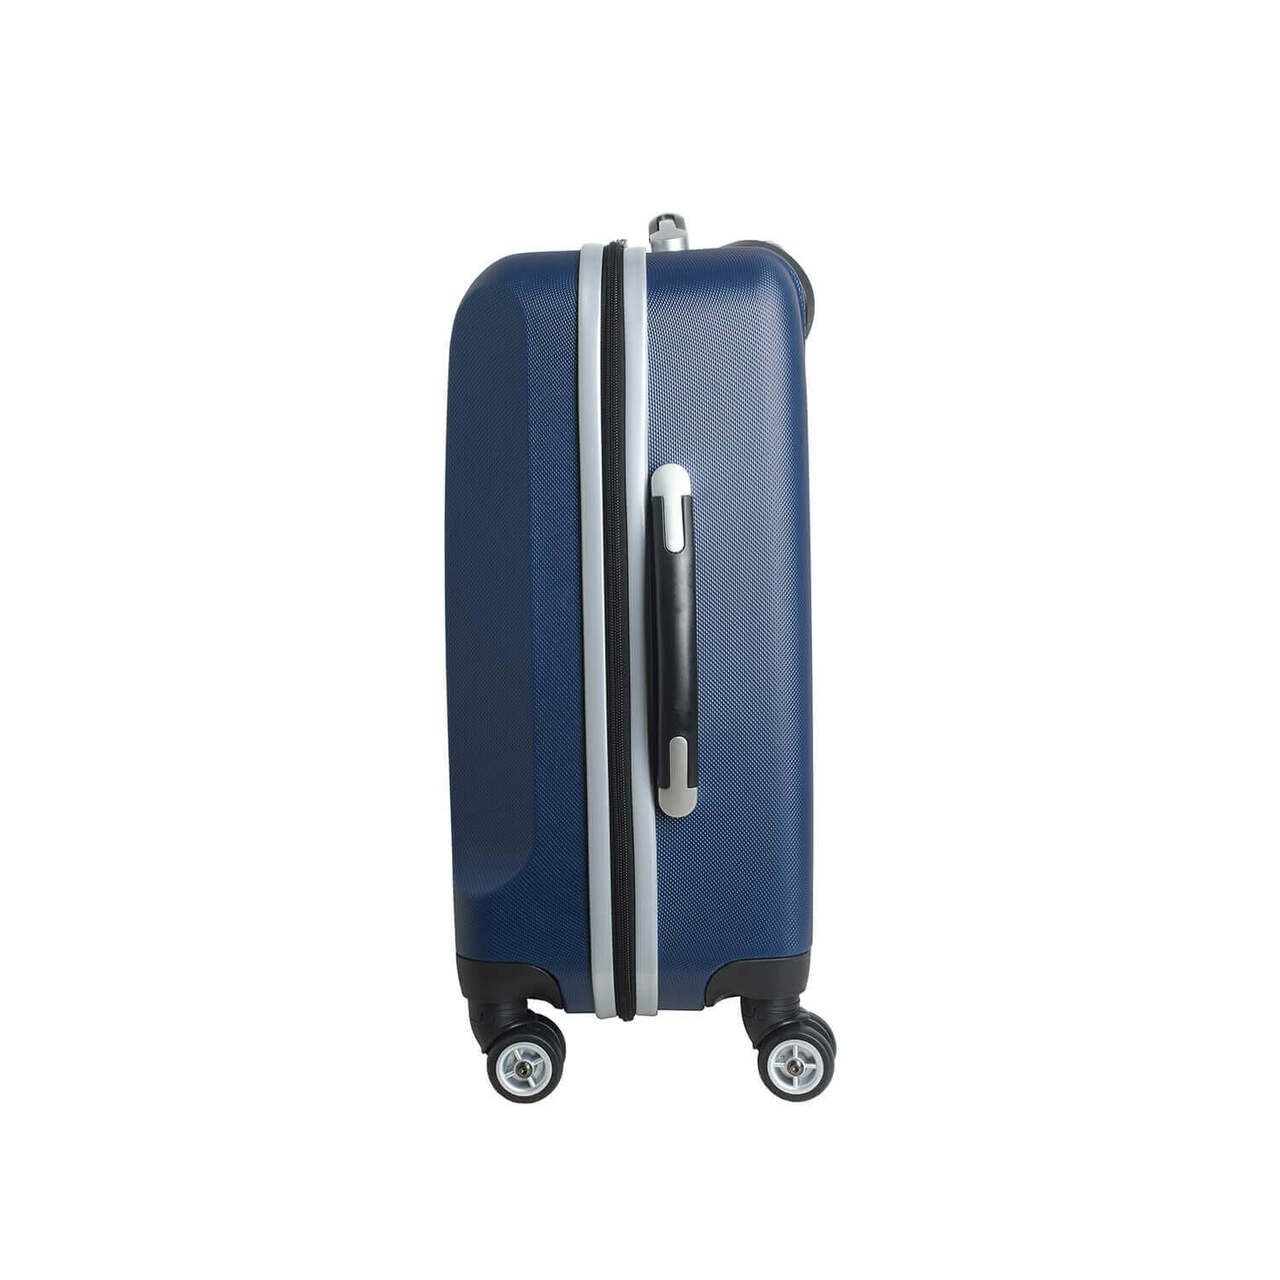 Personalized Initial Name letter "T" 20 inches Carry on Hardcase Spinner Luggage by Mojo in NAVY